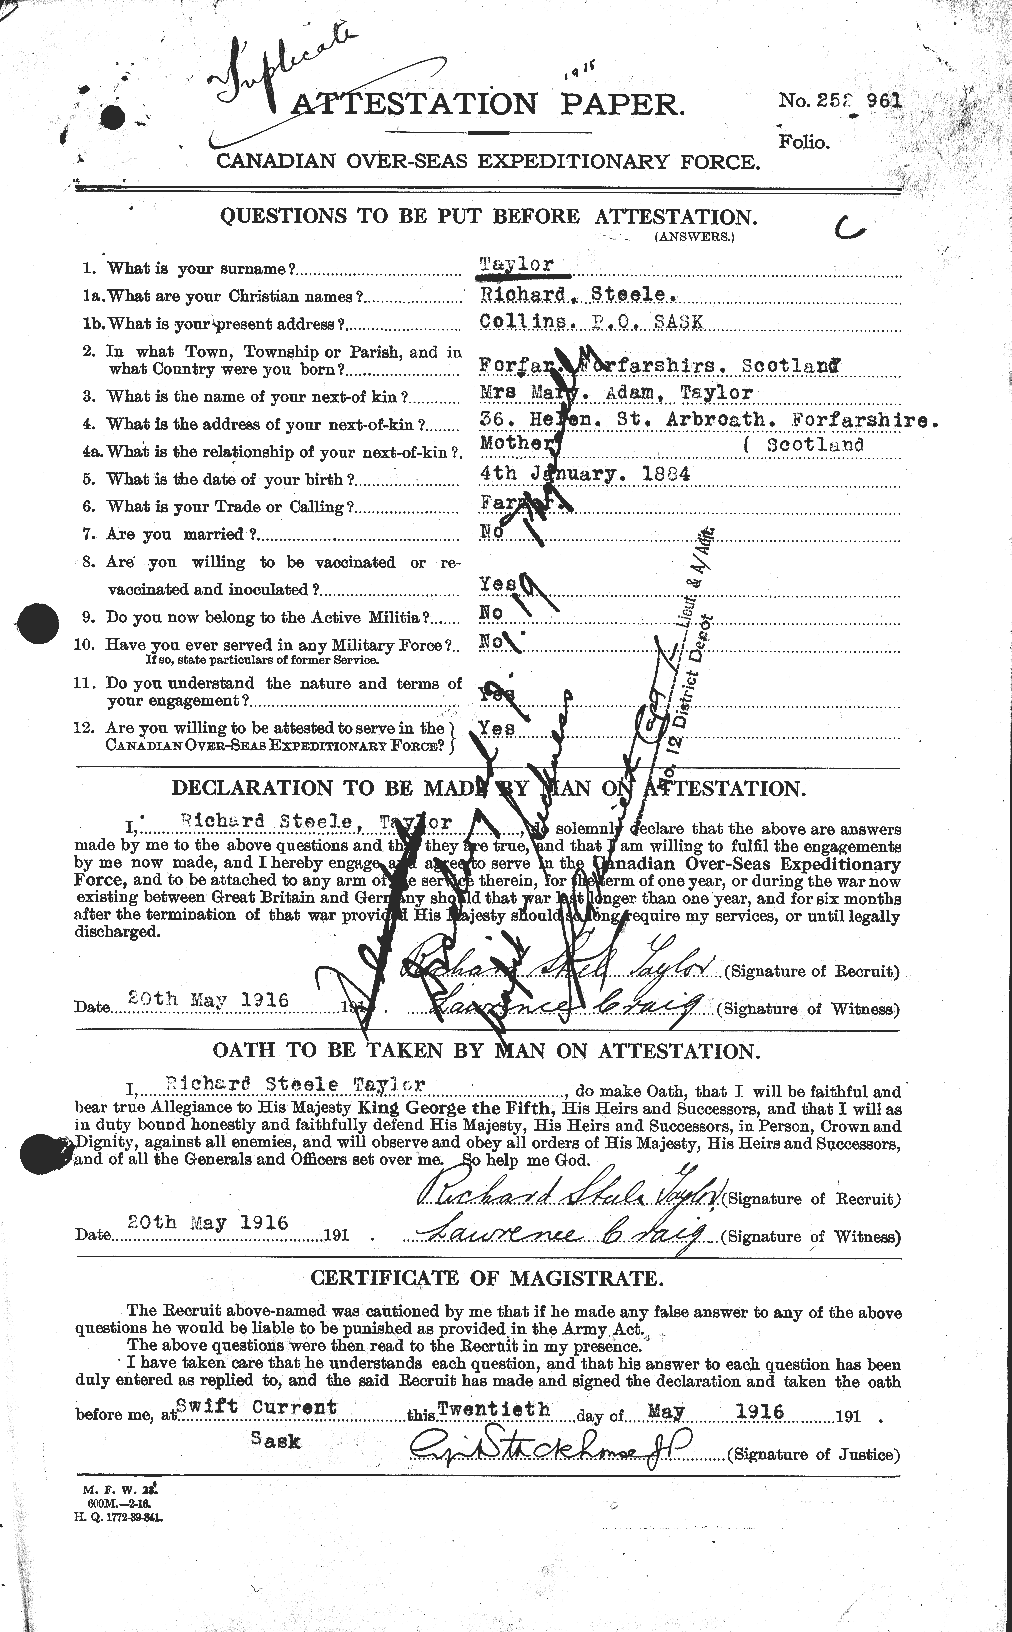 Personnel Records of the First World War - CEF 627421a